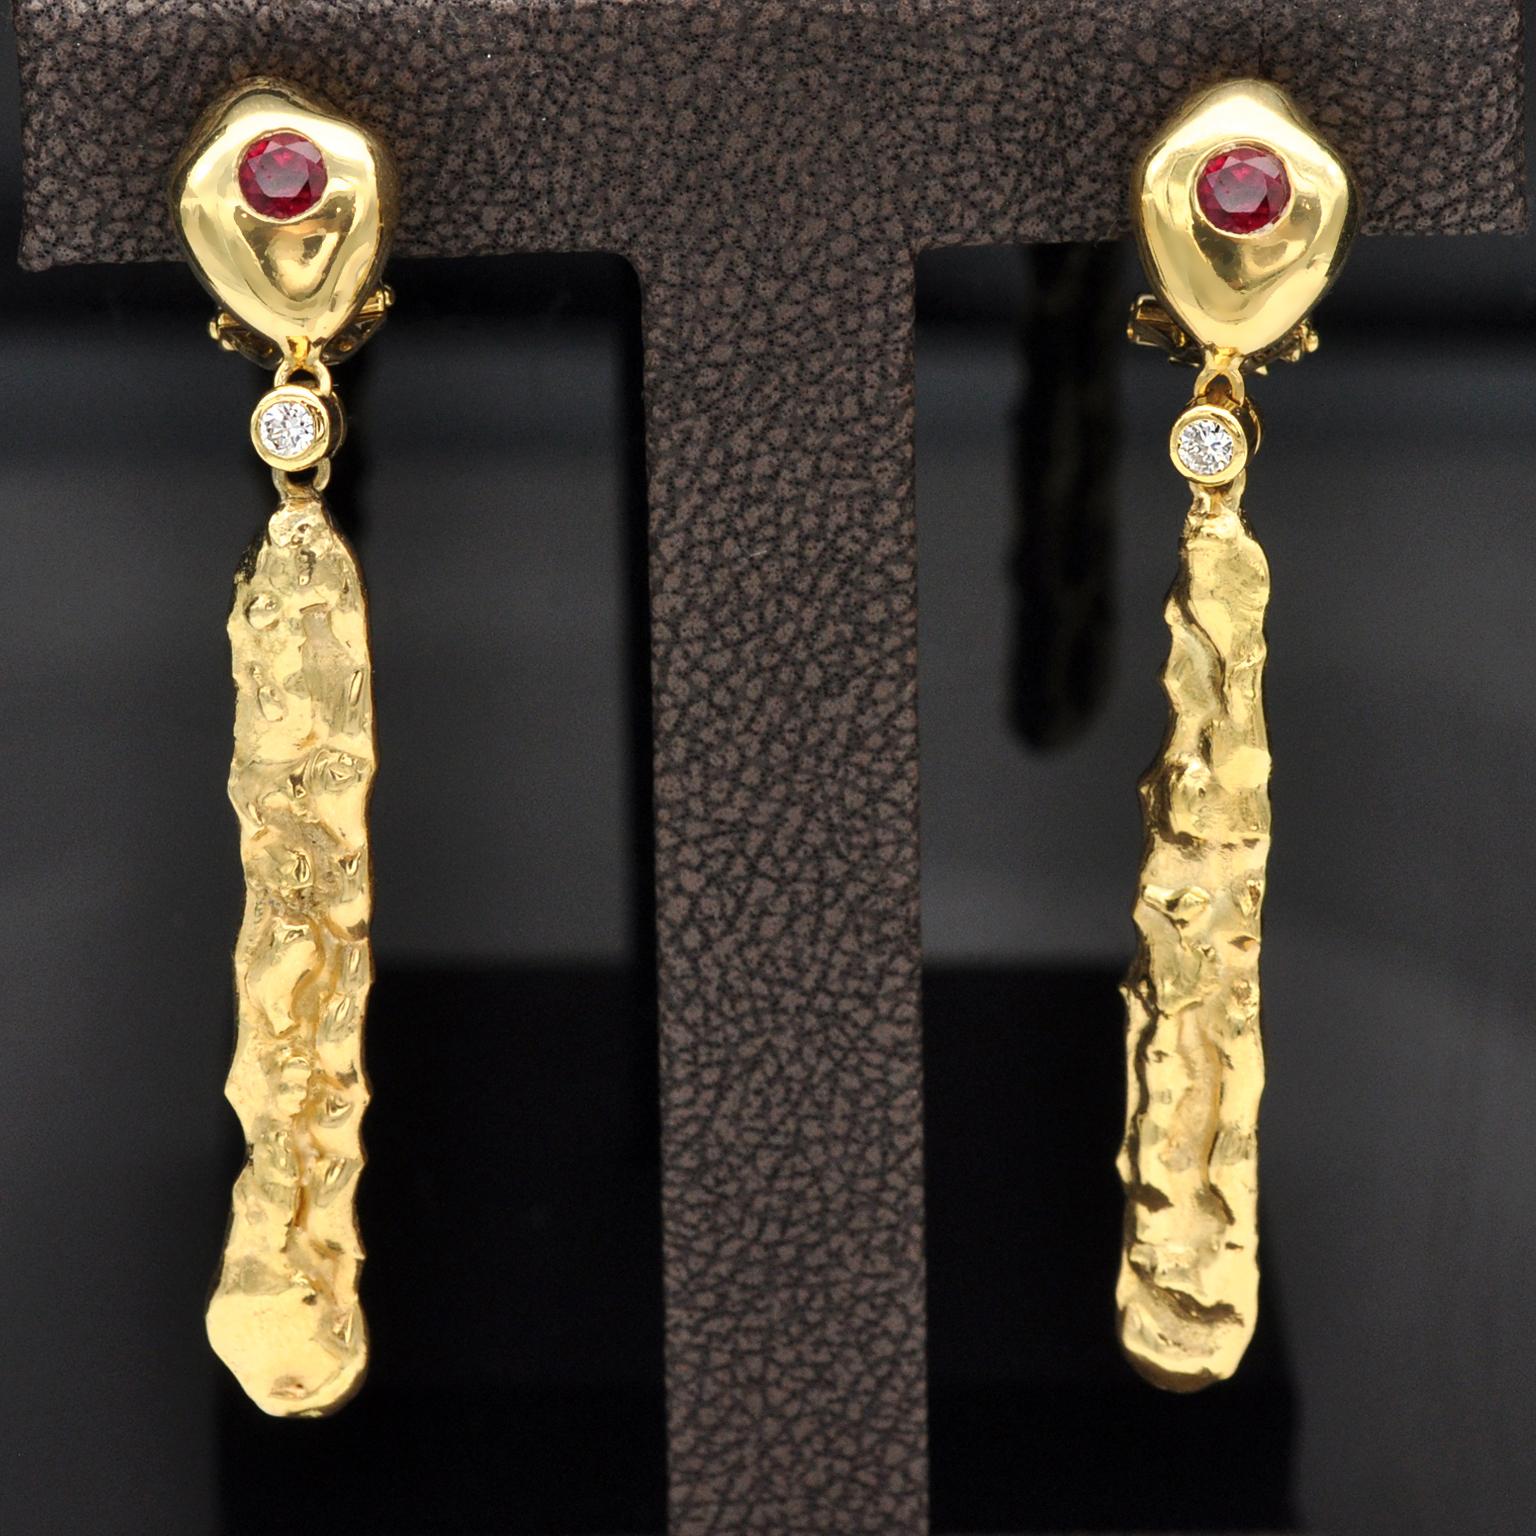 Modernist 18KT yellow gold dangle earrings: the top is shiny yellow gold set with a vivid red round ruby. a bezel set white diamond makes the junction with a long textured sculpture like dangling part.
Rubies : approximately 0.60 carat
Diamonds: